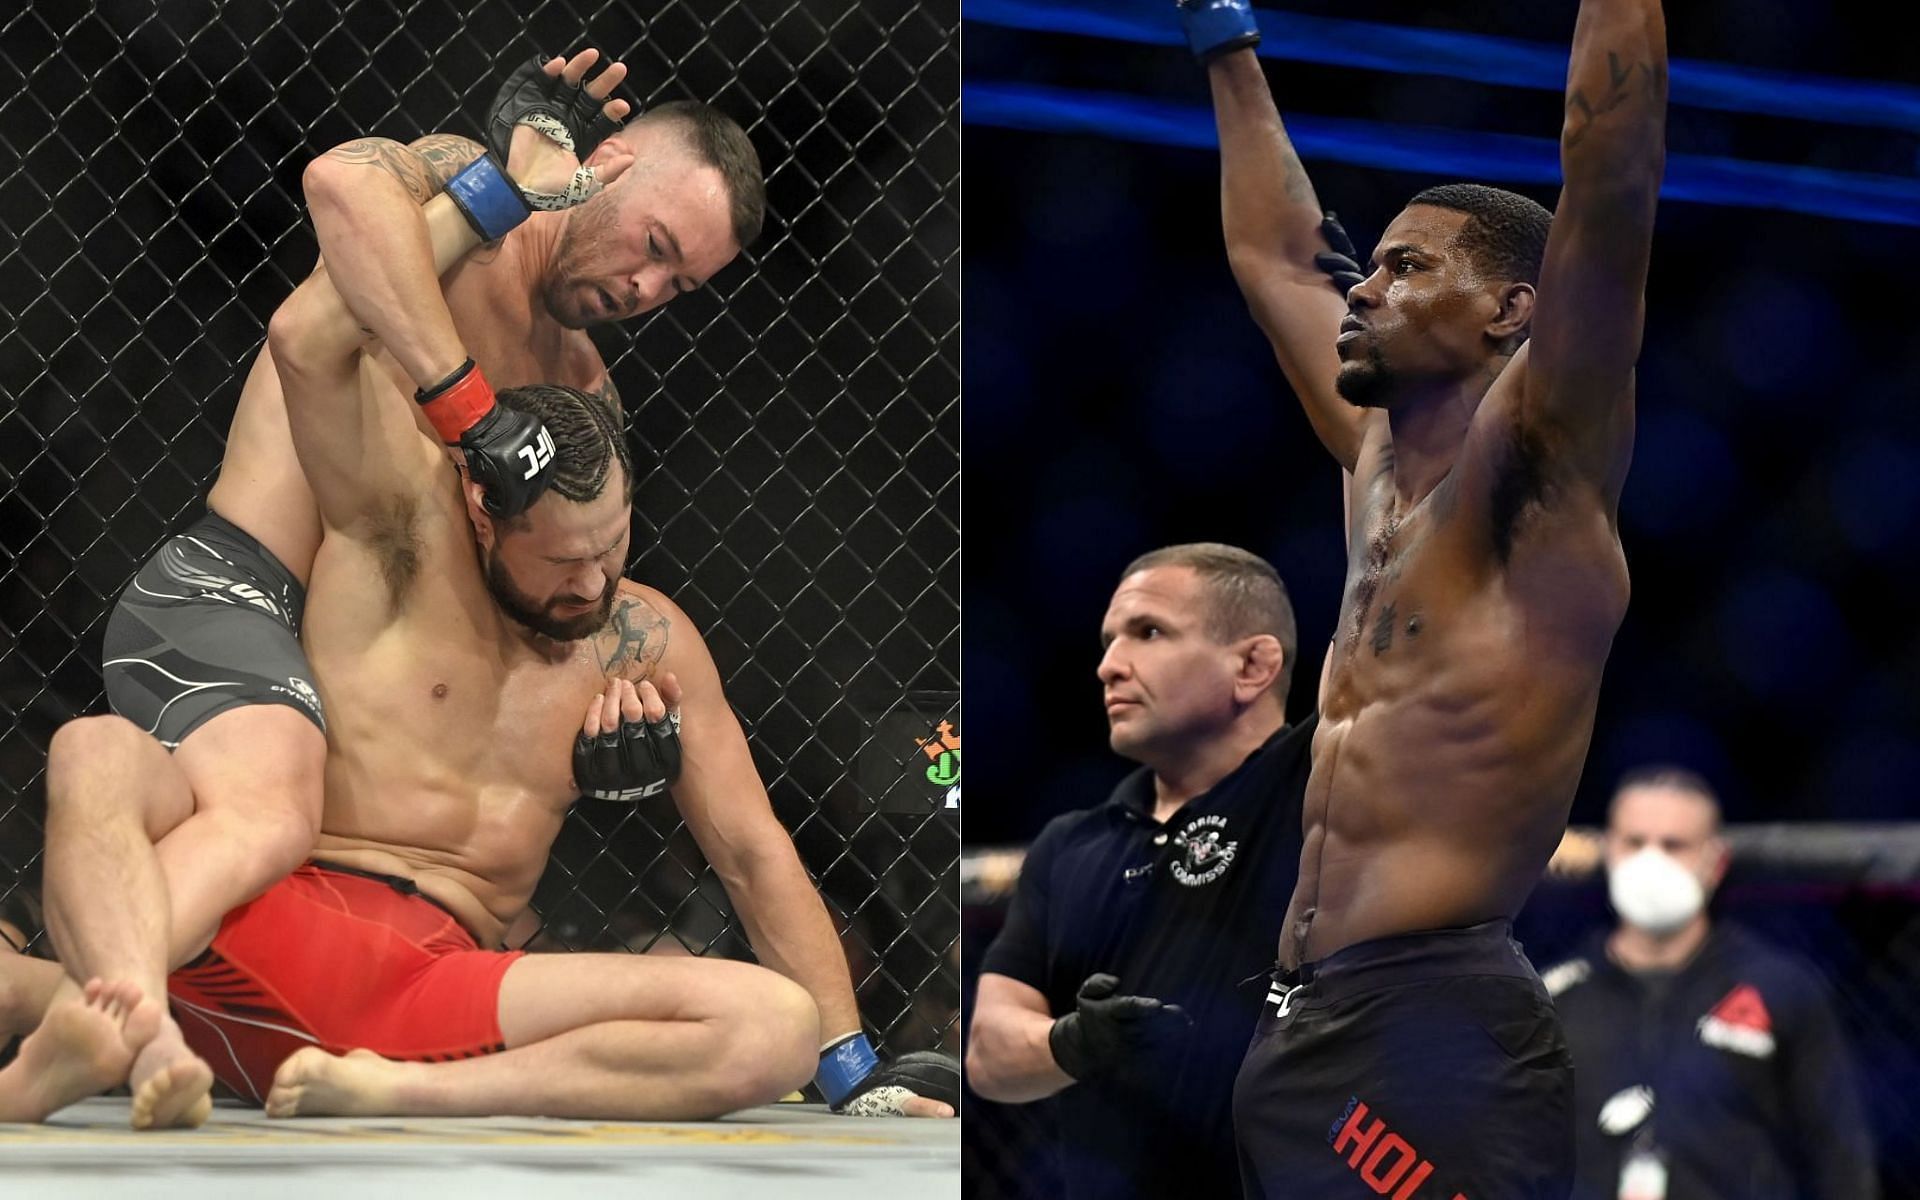 Colby Covington and Kevin Holland were among the winners at UFC 272